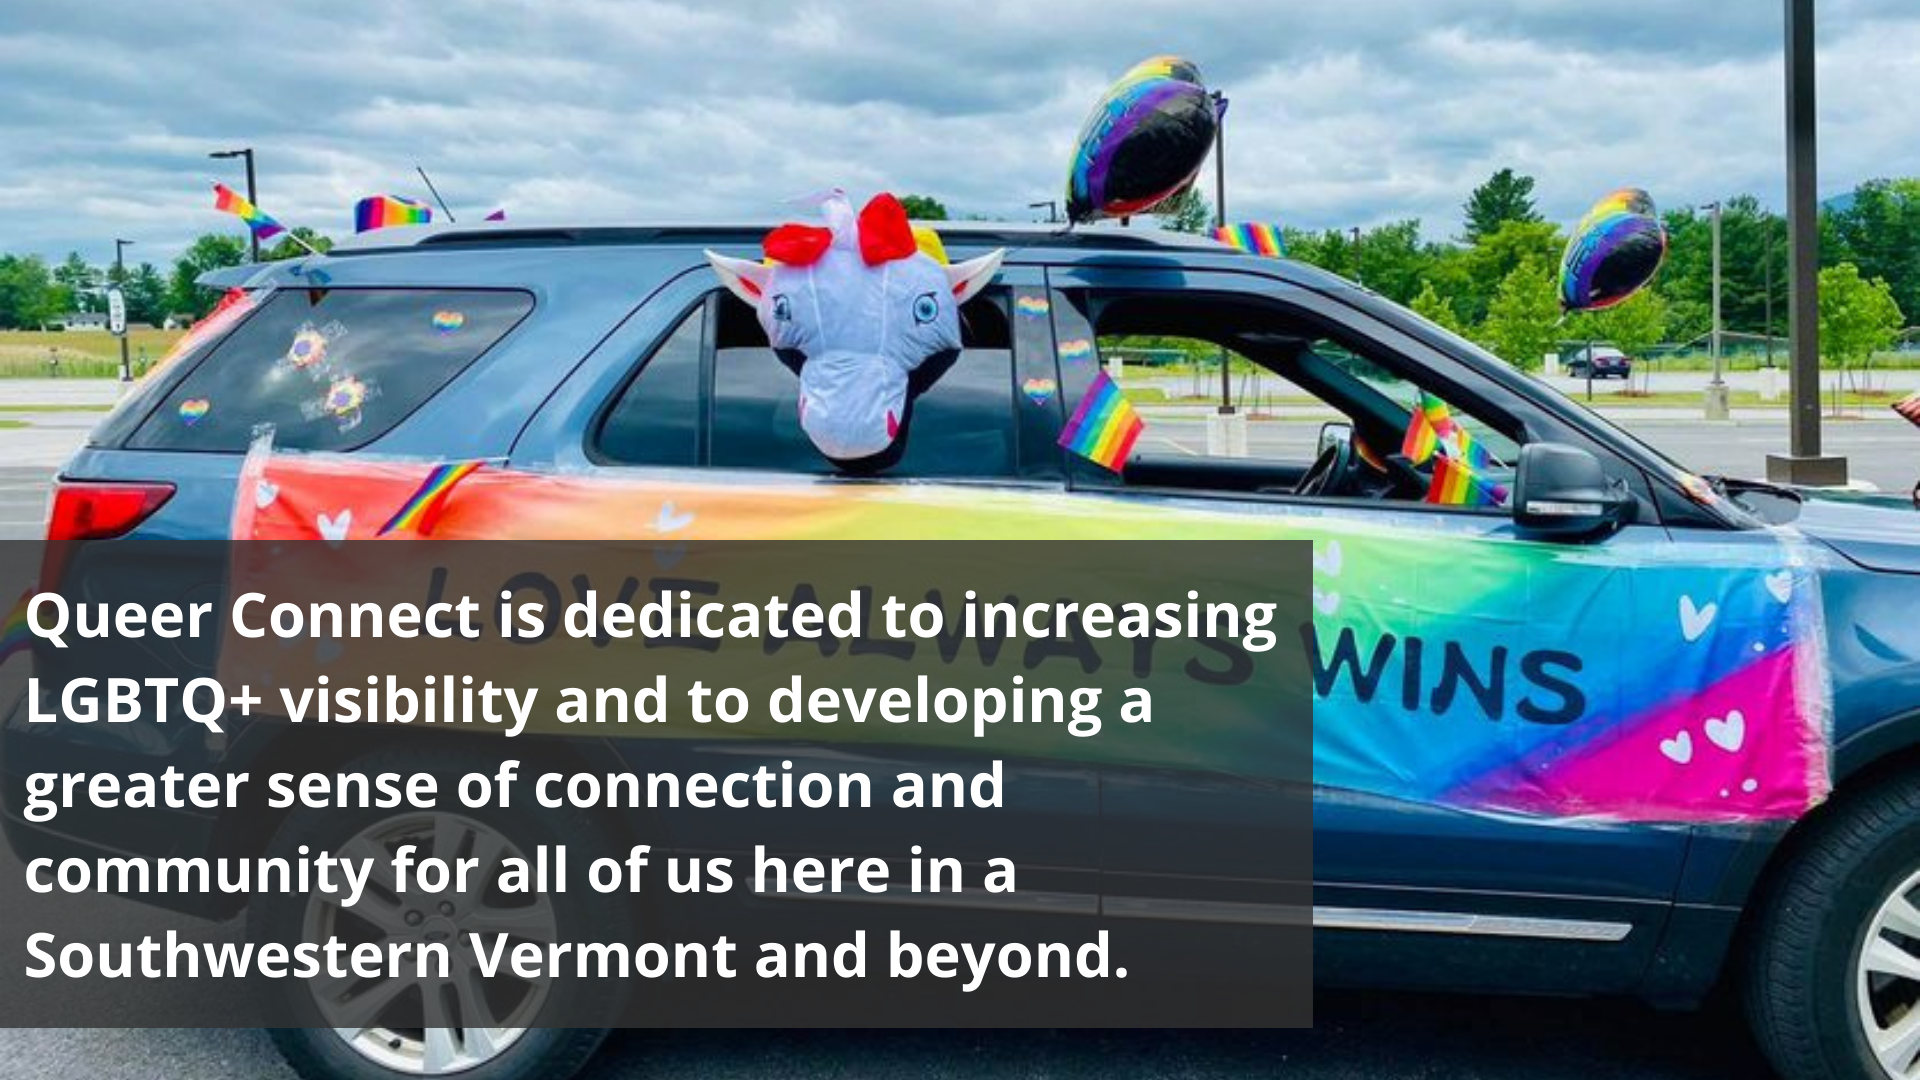 Queer Connect is dedicated to increasing LGBTQ+ visibility and to developing a greater sense of connection and community for all of us here in Southwestern Vermont and beyond.